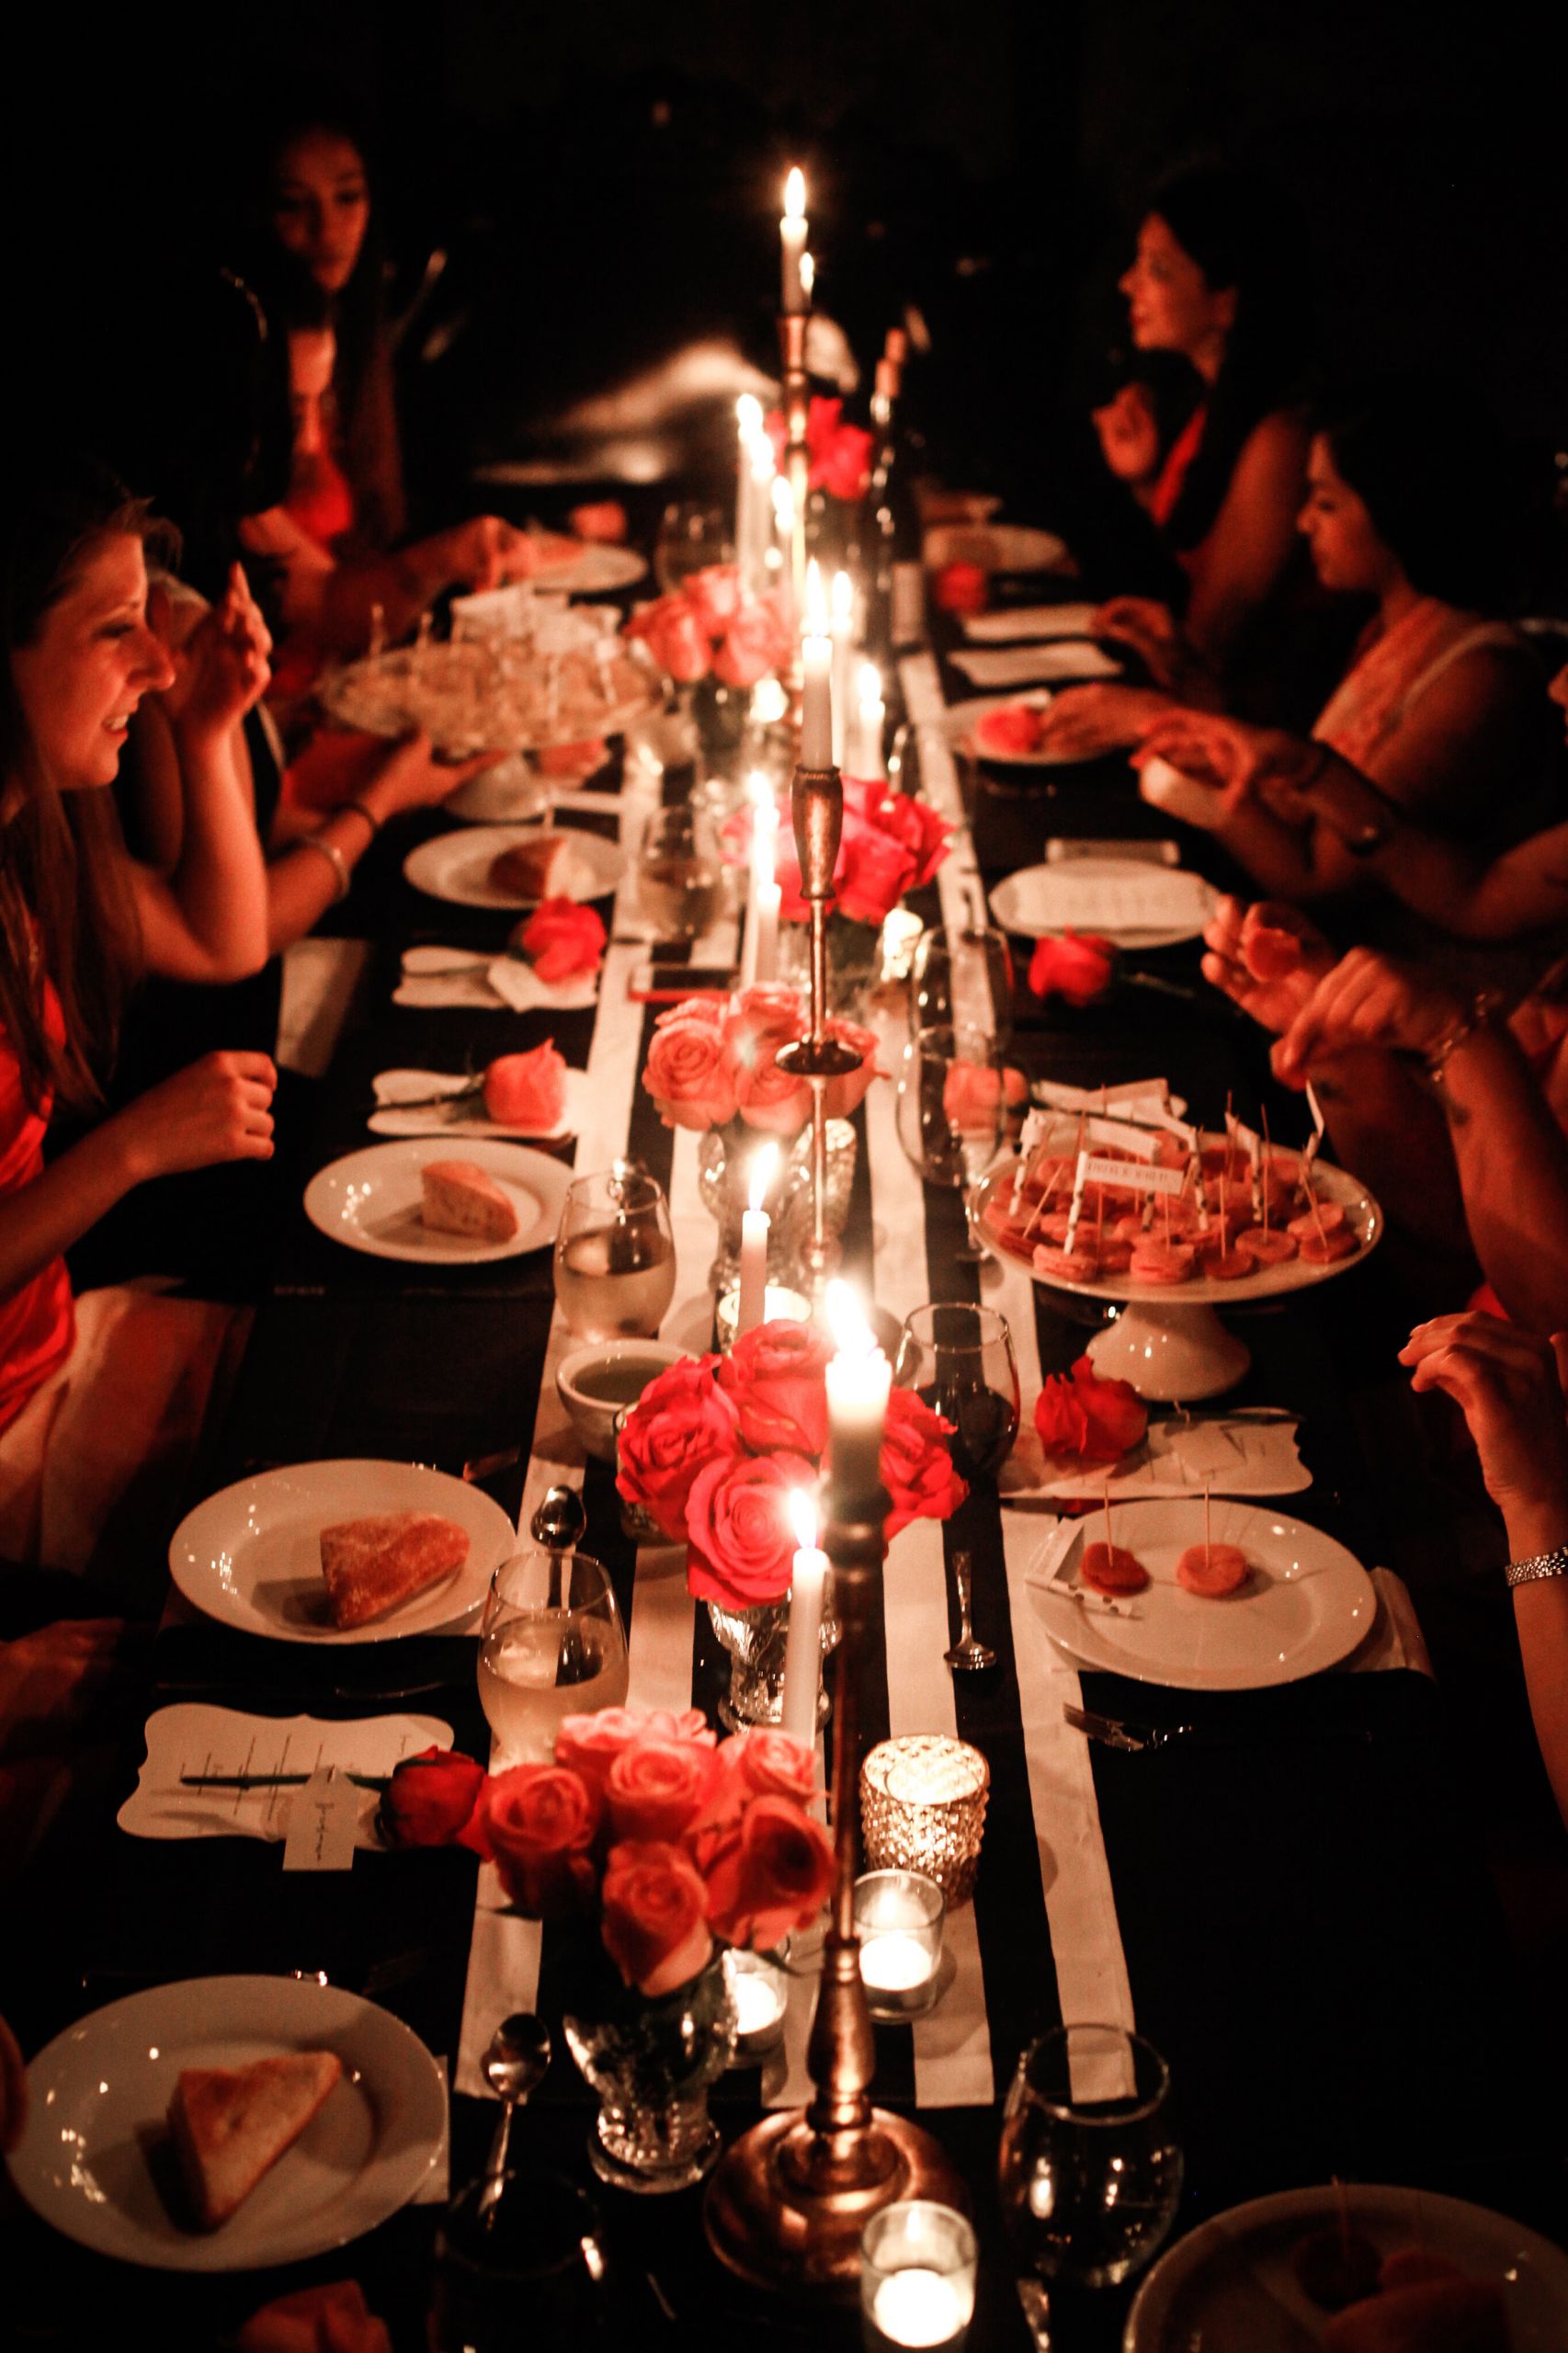 Bachelorette Party Dinner Ideas Nyc
 Intimate Parisian Bachelorette Party Dinner TrueBlu